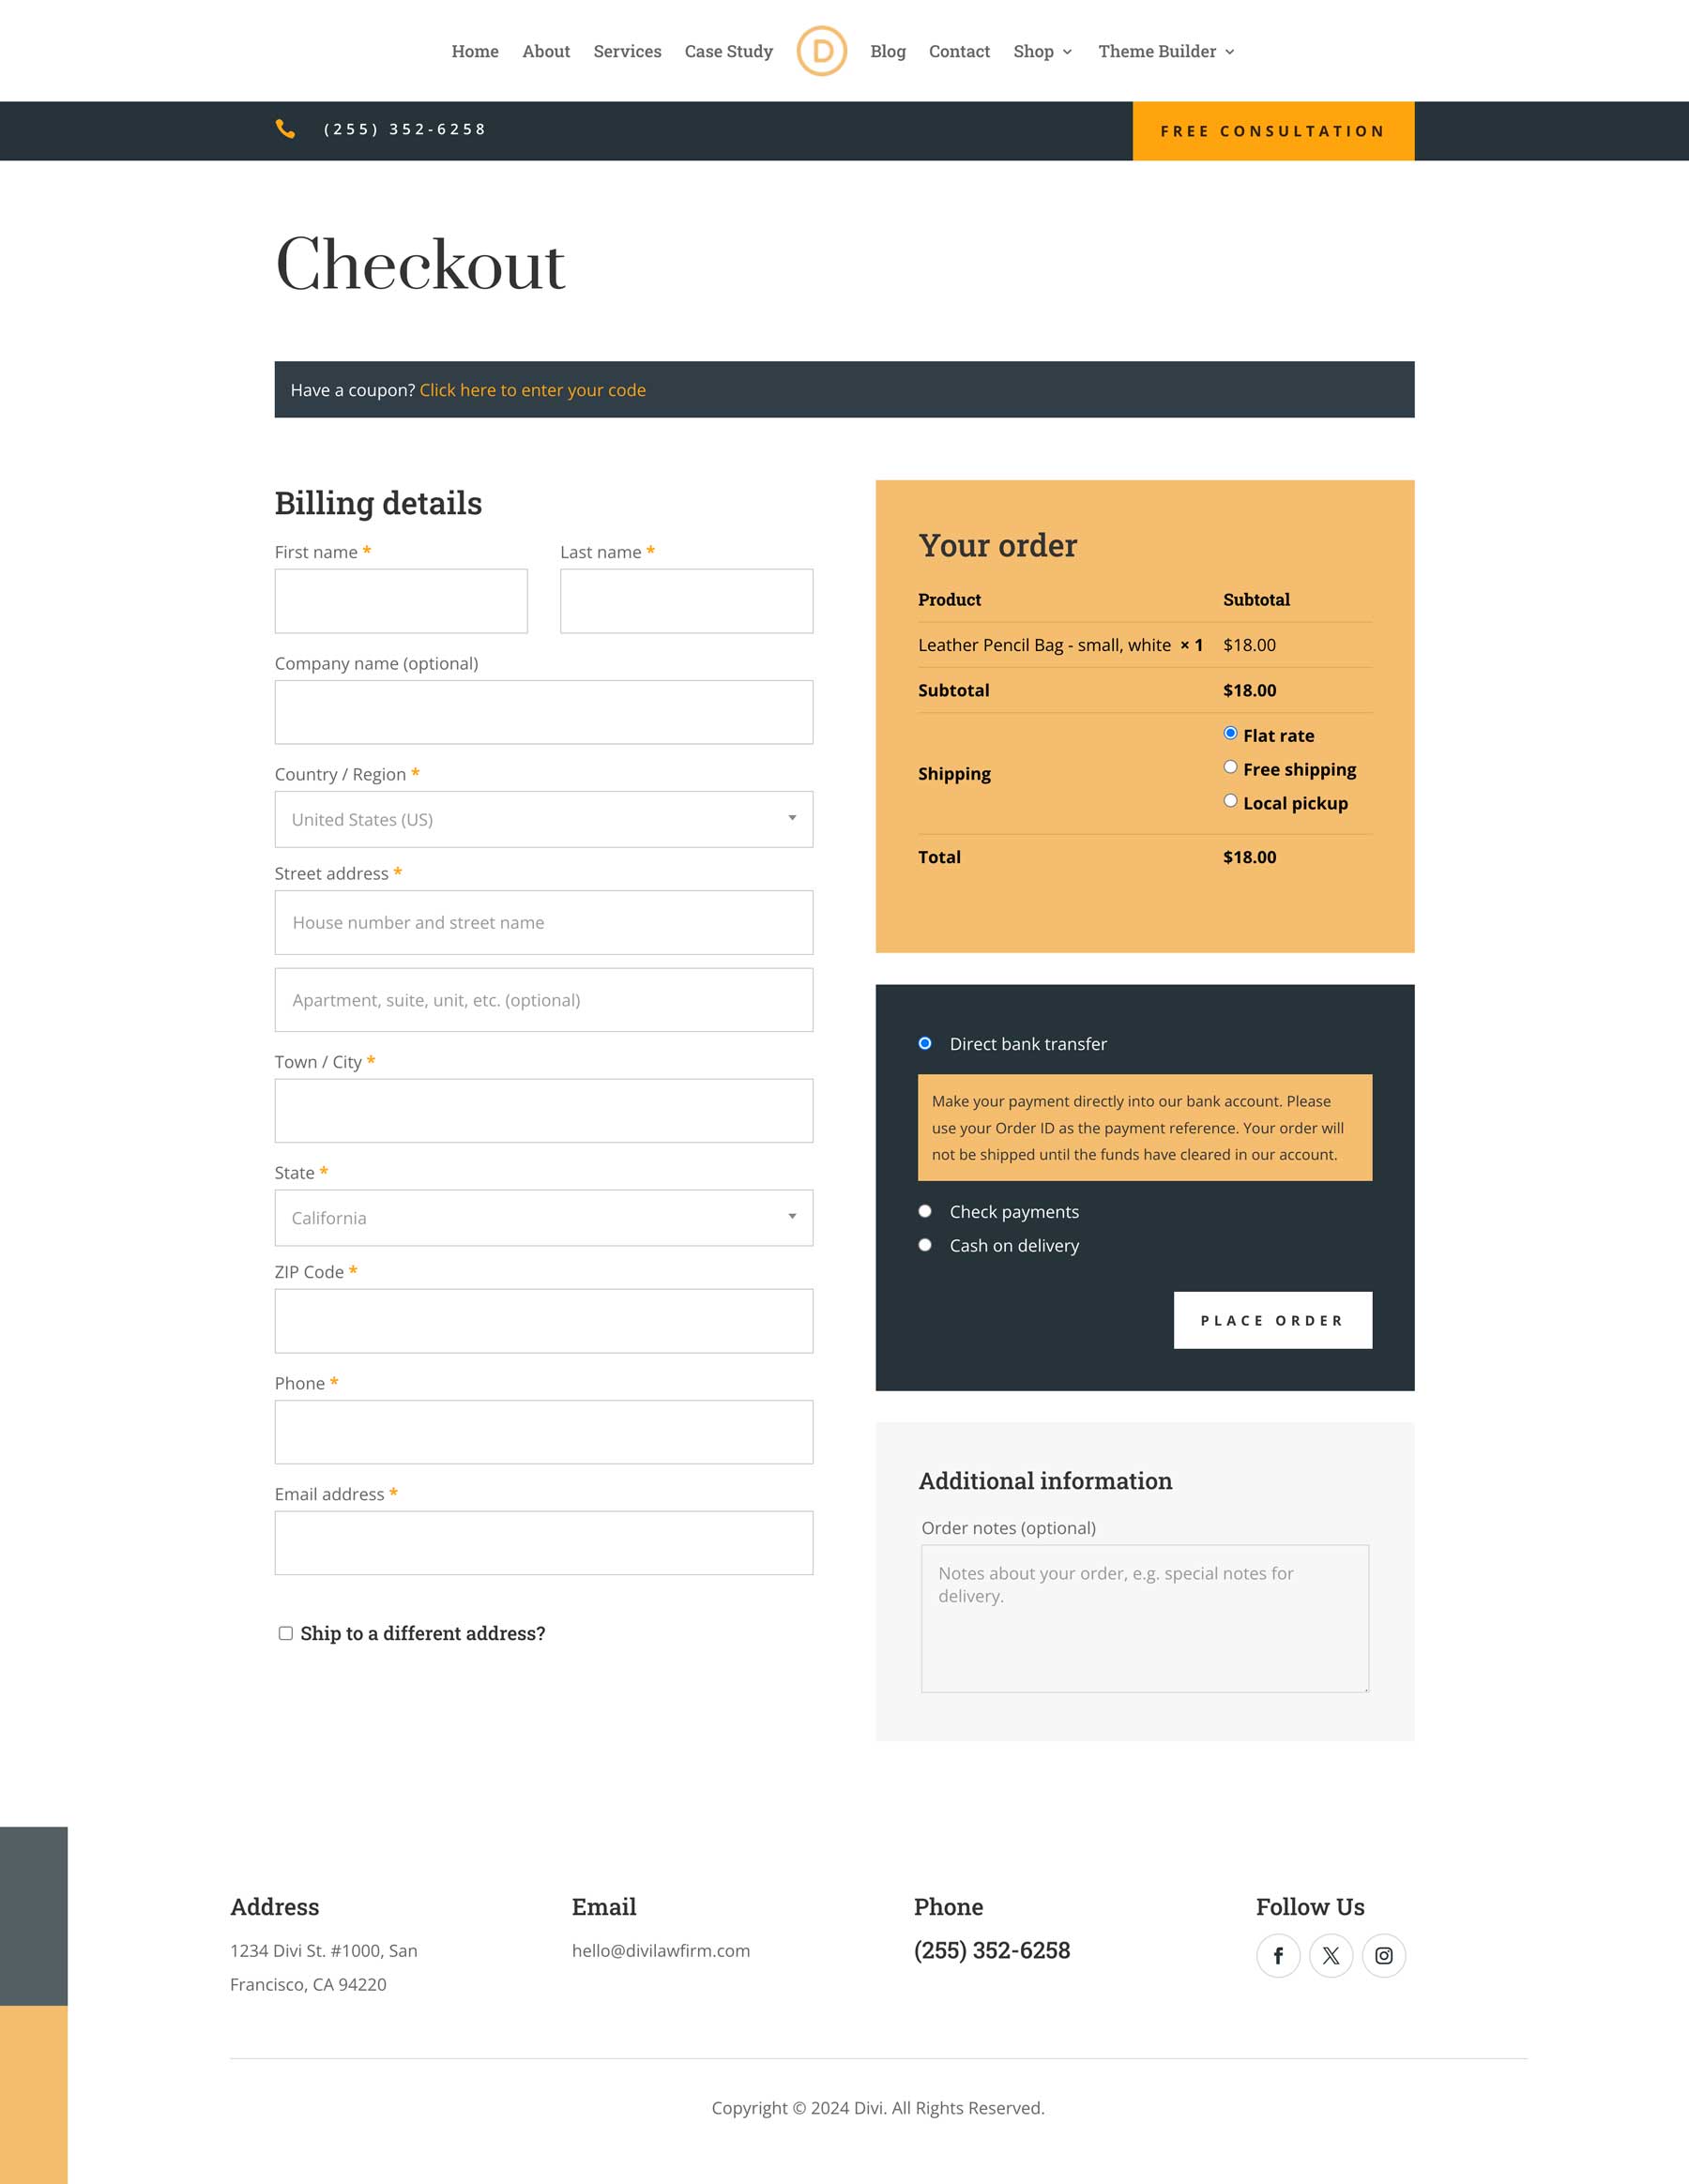 Law Firm theme builder pack